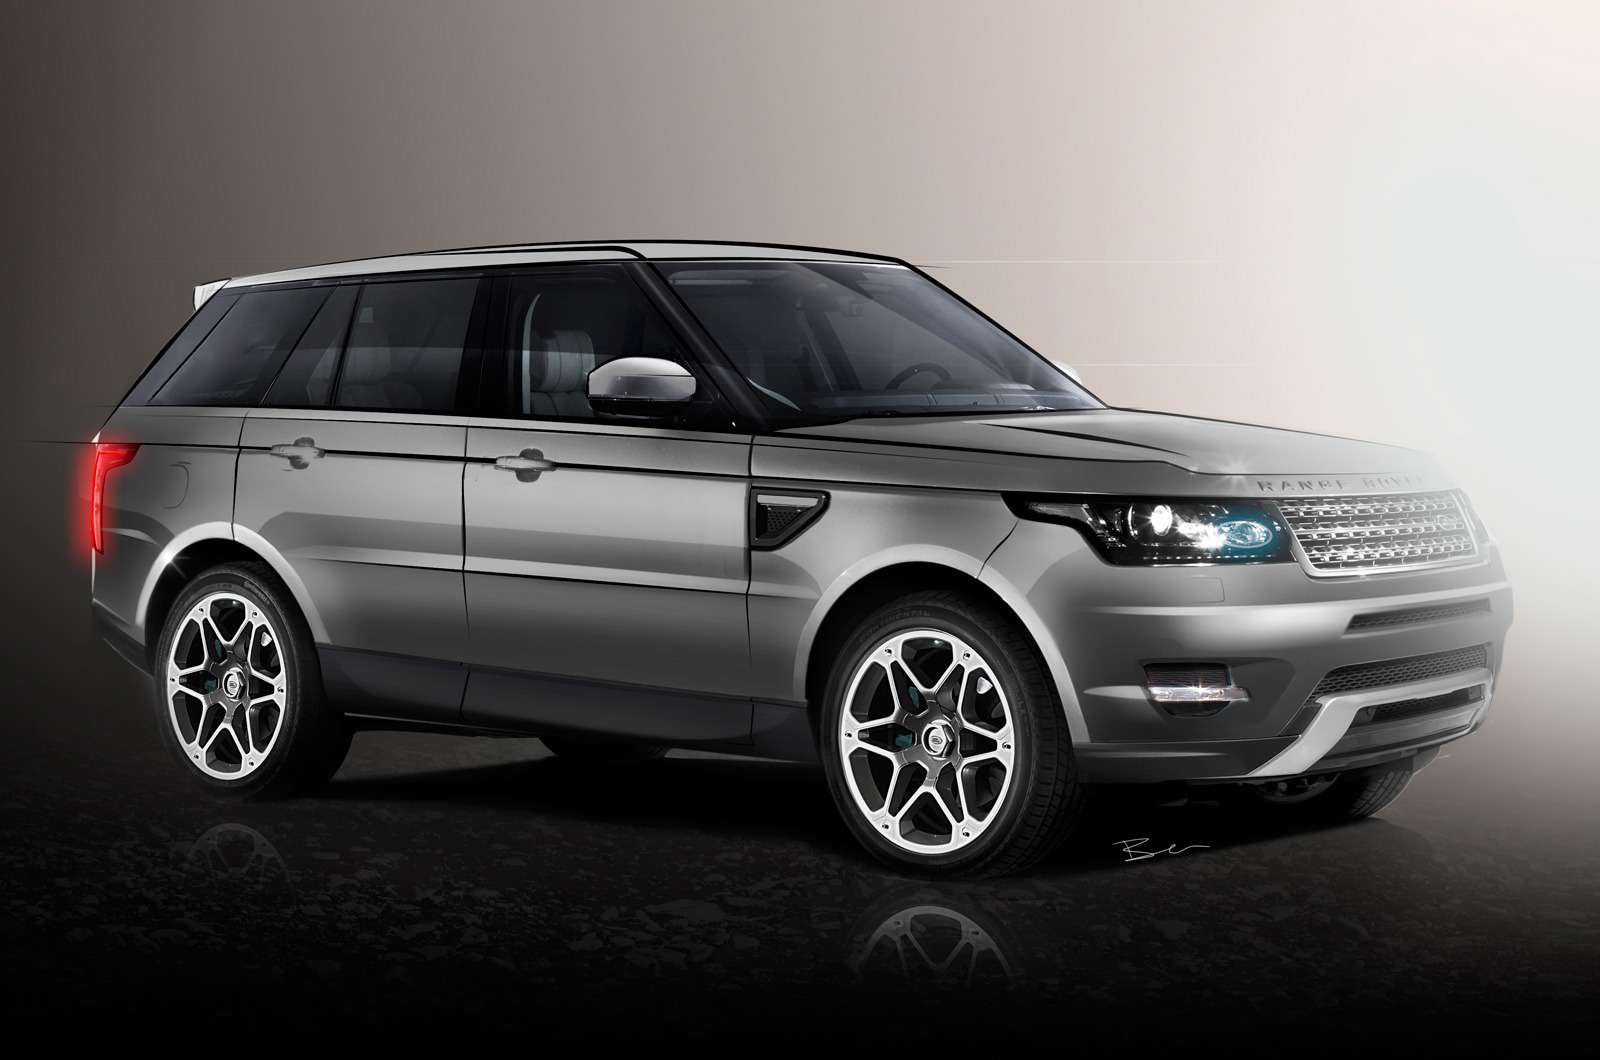 New Range Rover Sport rendering by Autocar side-front view_no_copyright